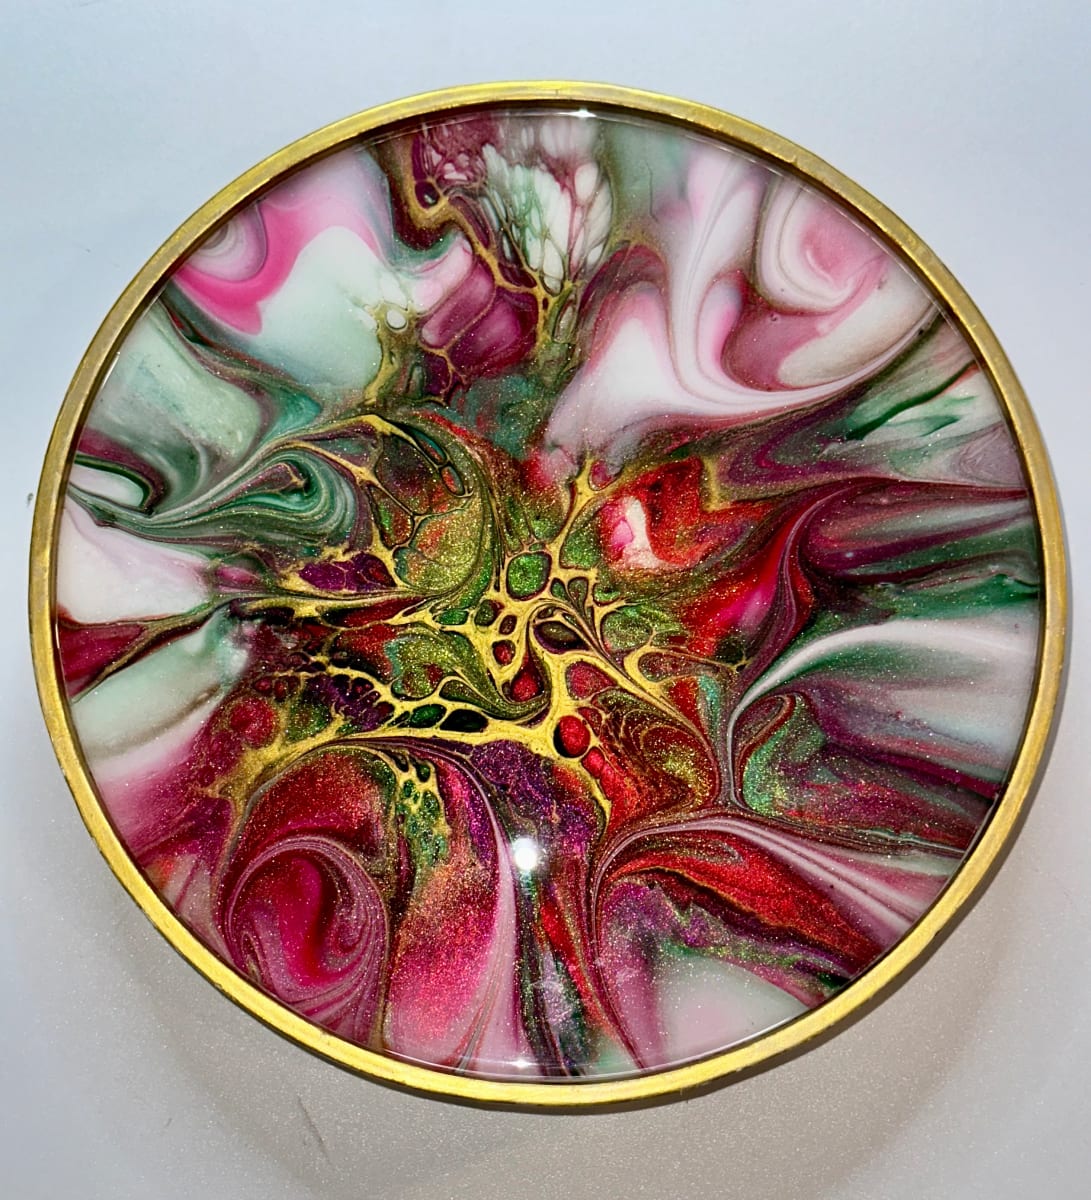 Christmastime 9” Gold Platter by Pourin’ My Heart Out - Fluid Art by Angela Lloyd 